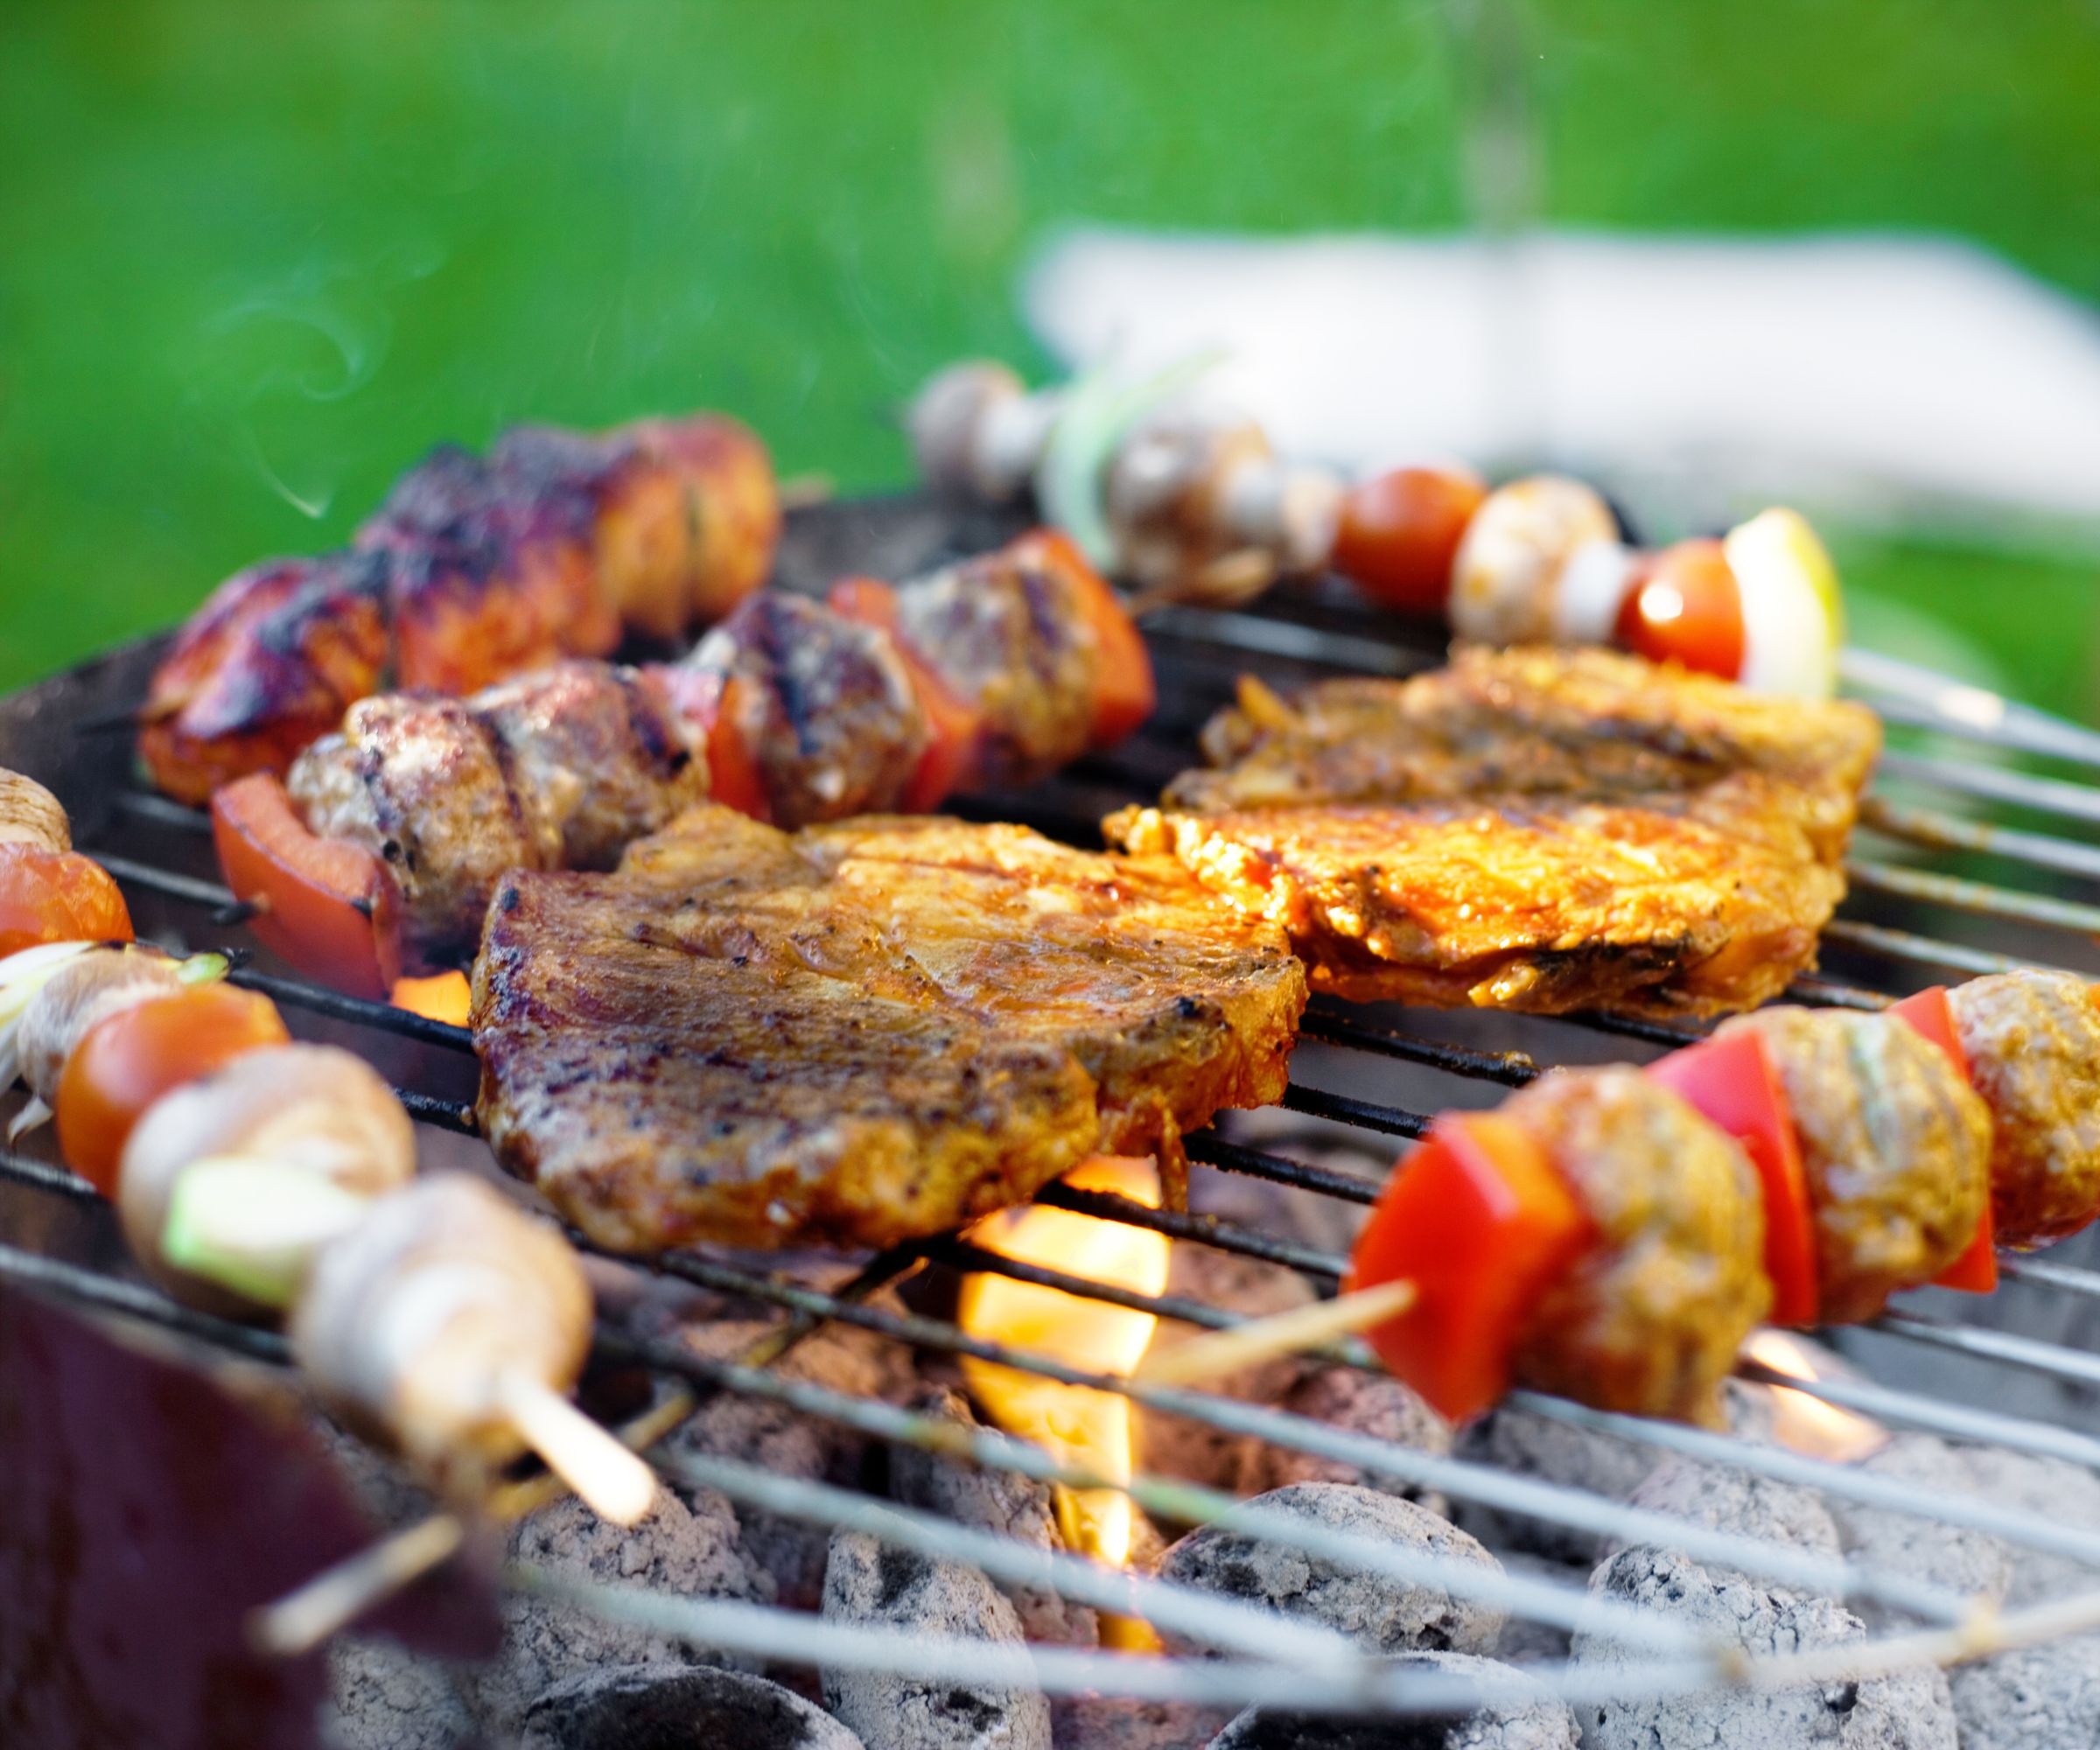 Grilling meat and kebabs on a charcoal